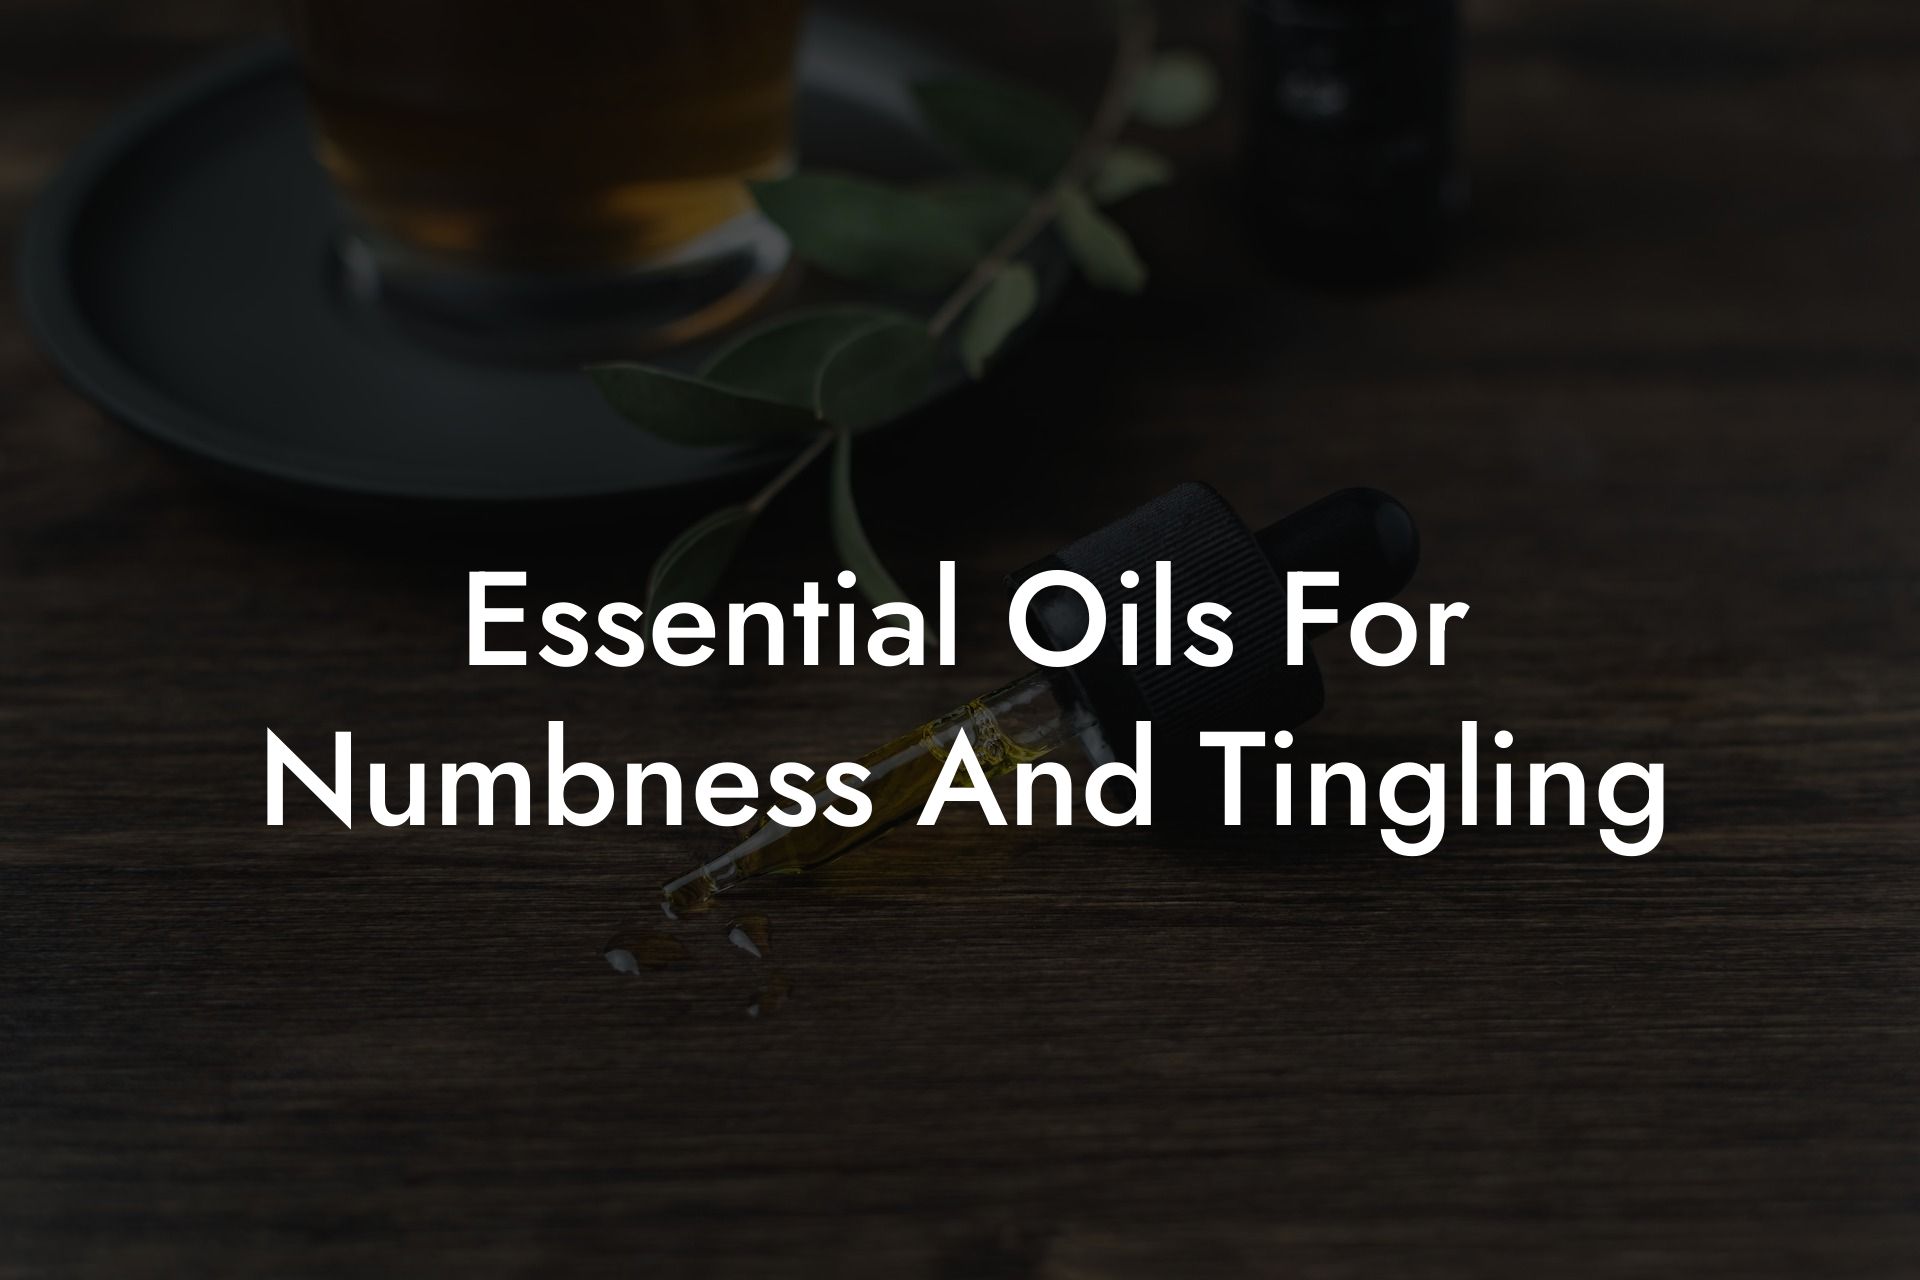 Essential Oils For Numbness And Tingling